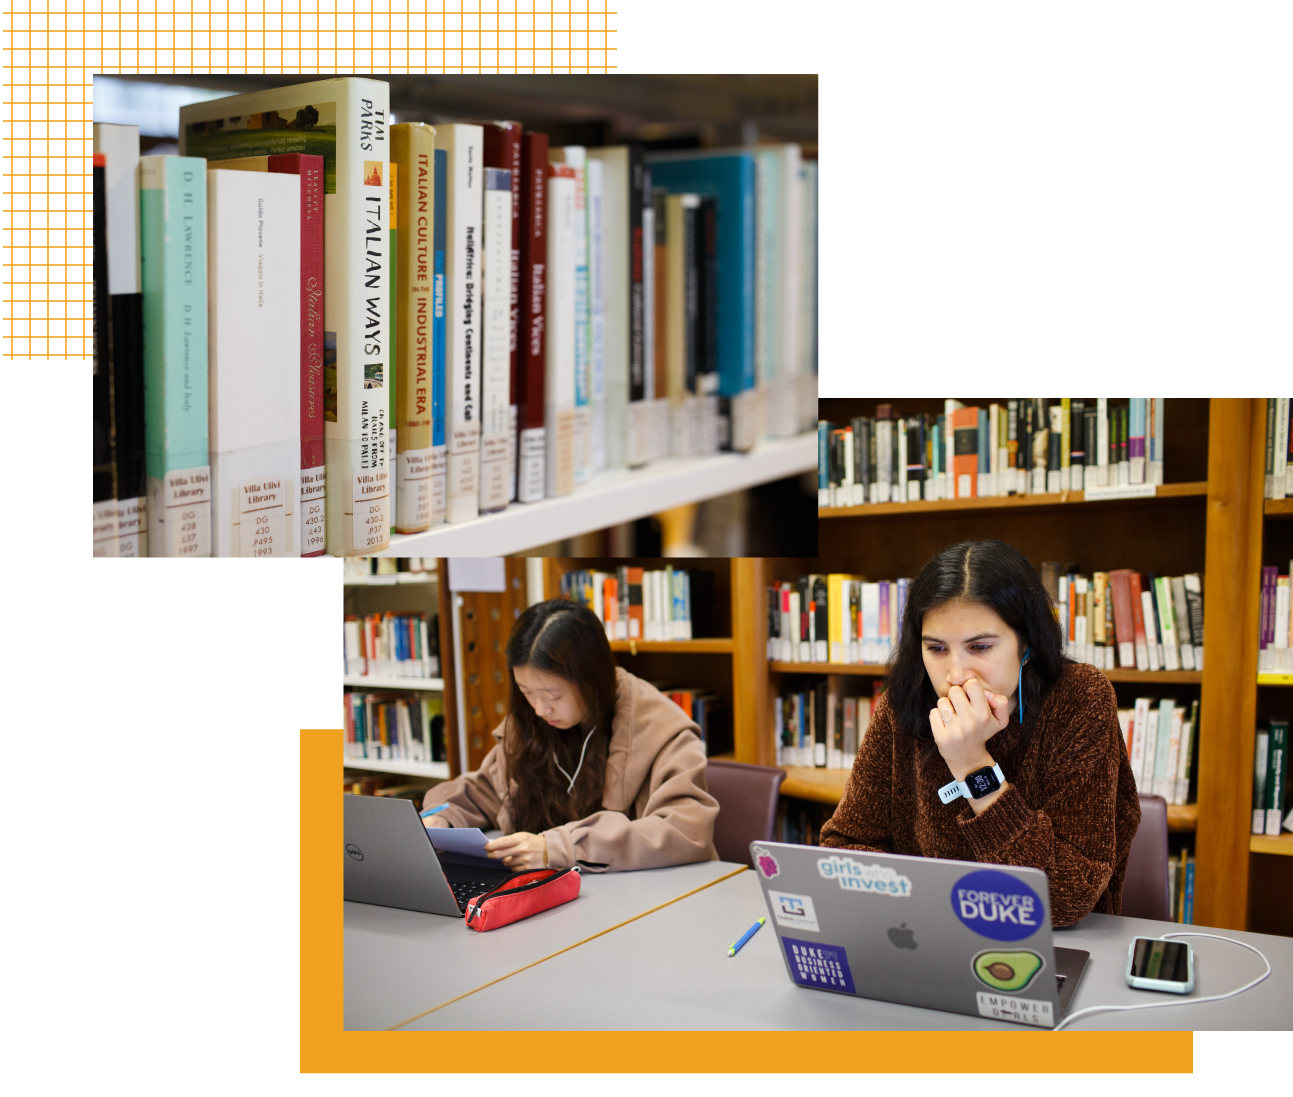 A collage: 1) A stack of books on a bookshelf. 2) Two romance languages students working on laptops in a library.